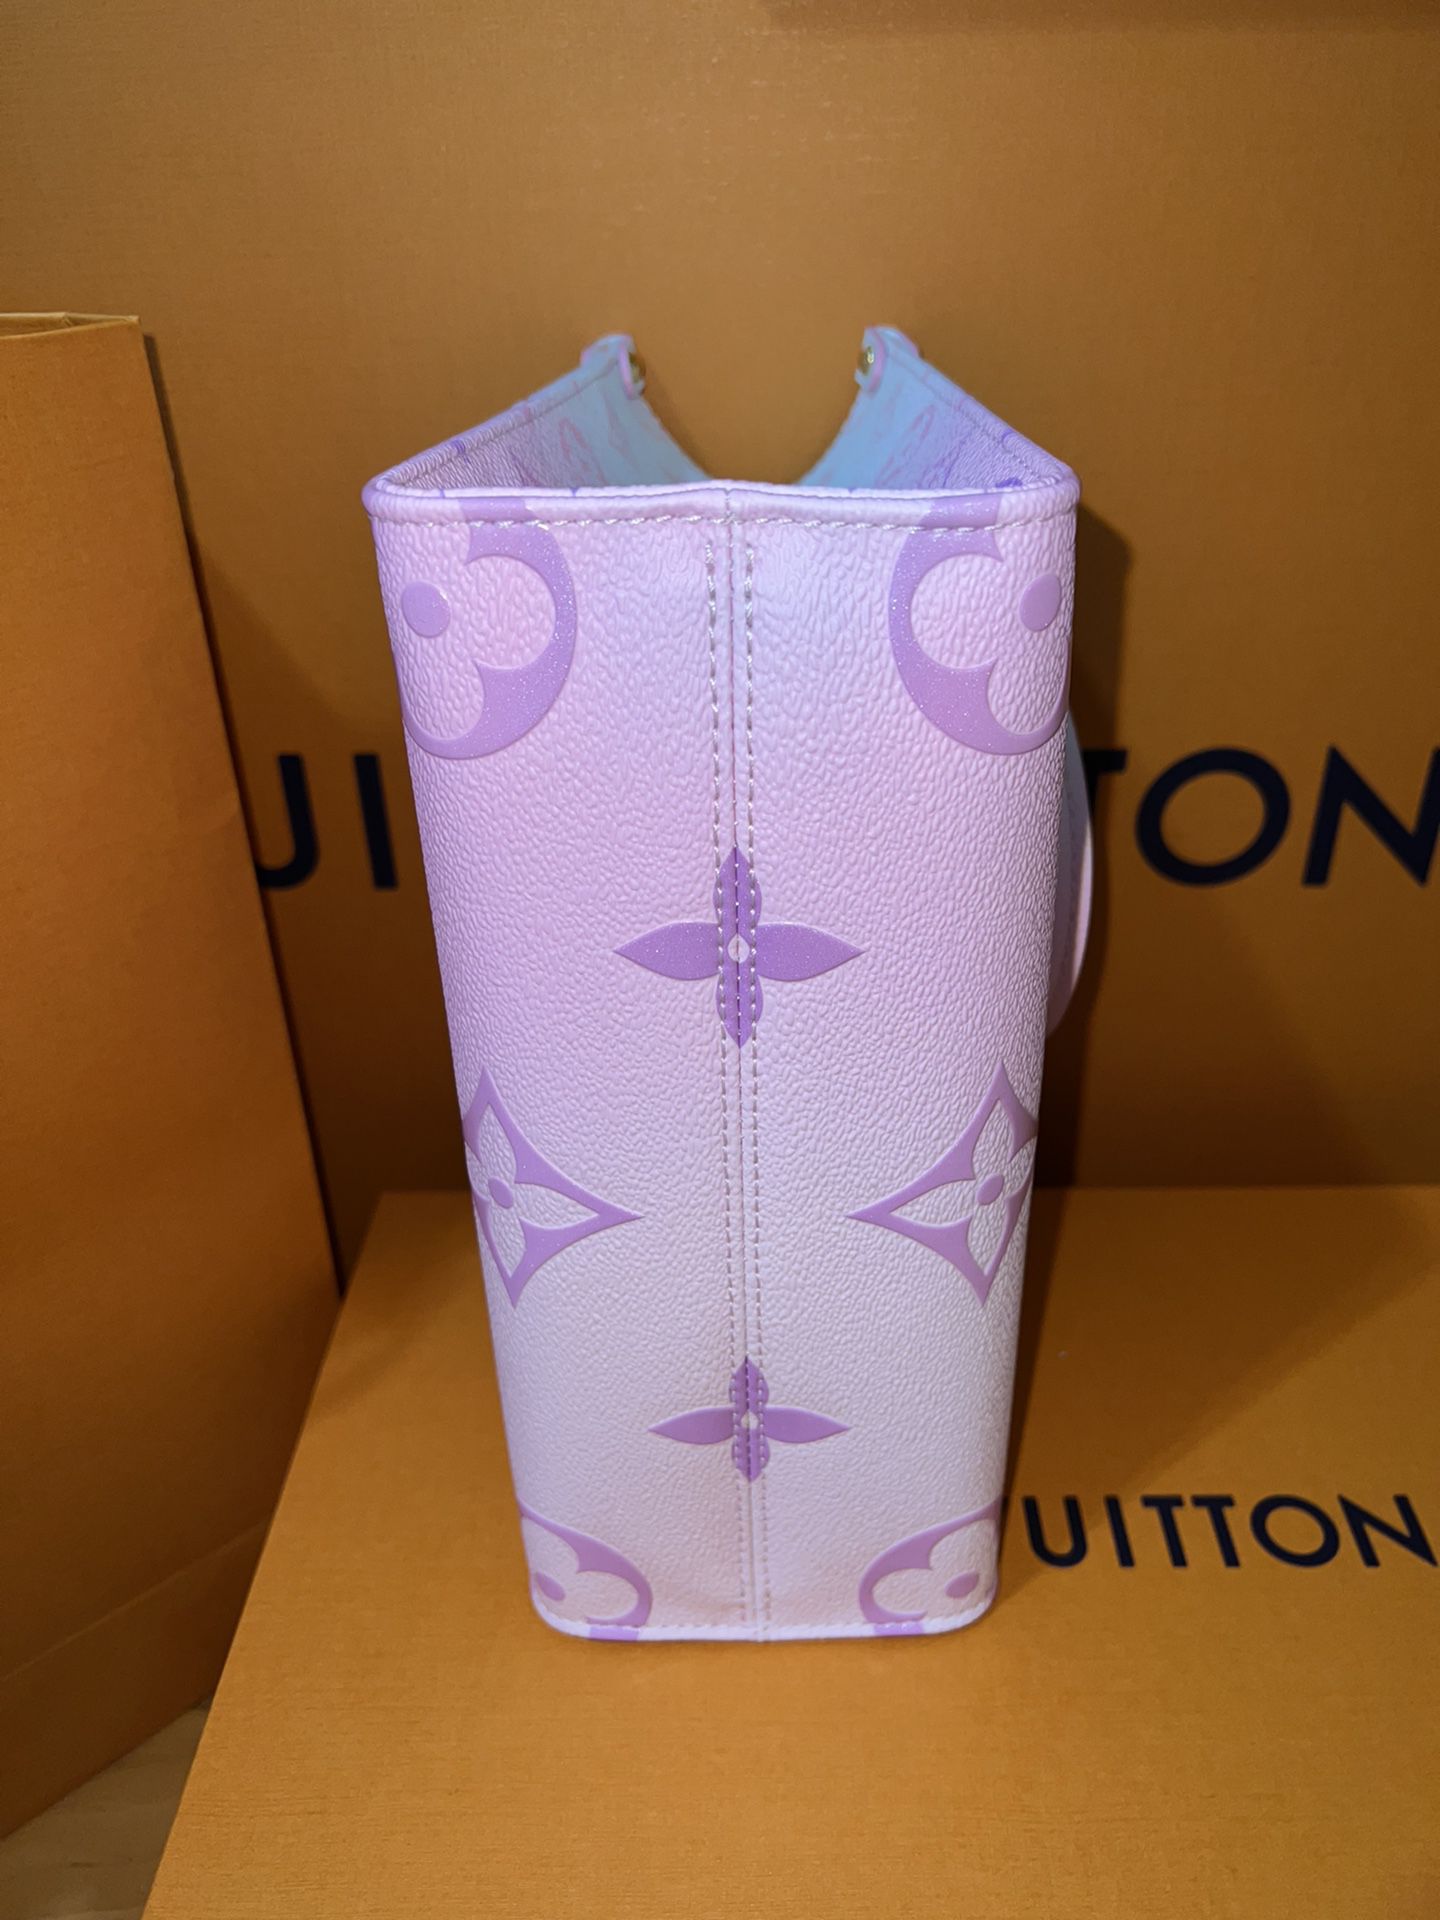 100% AUTH NWT LOUIS VUITTON OnTheGo PM PASTEL Spring Sunset box